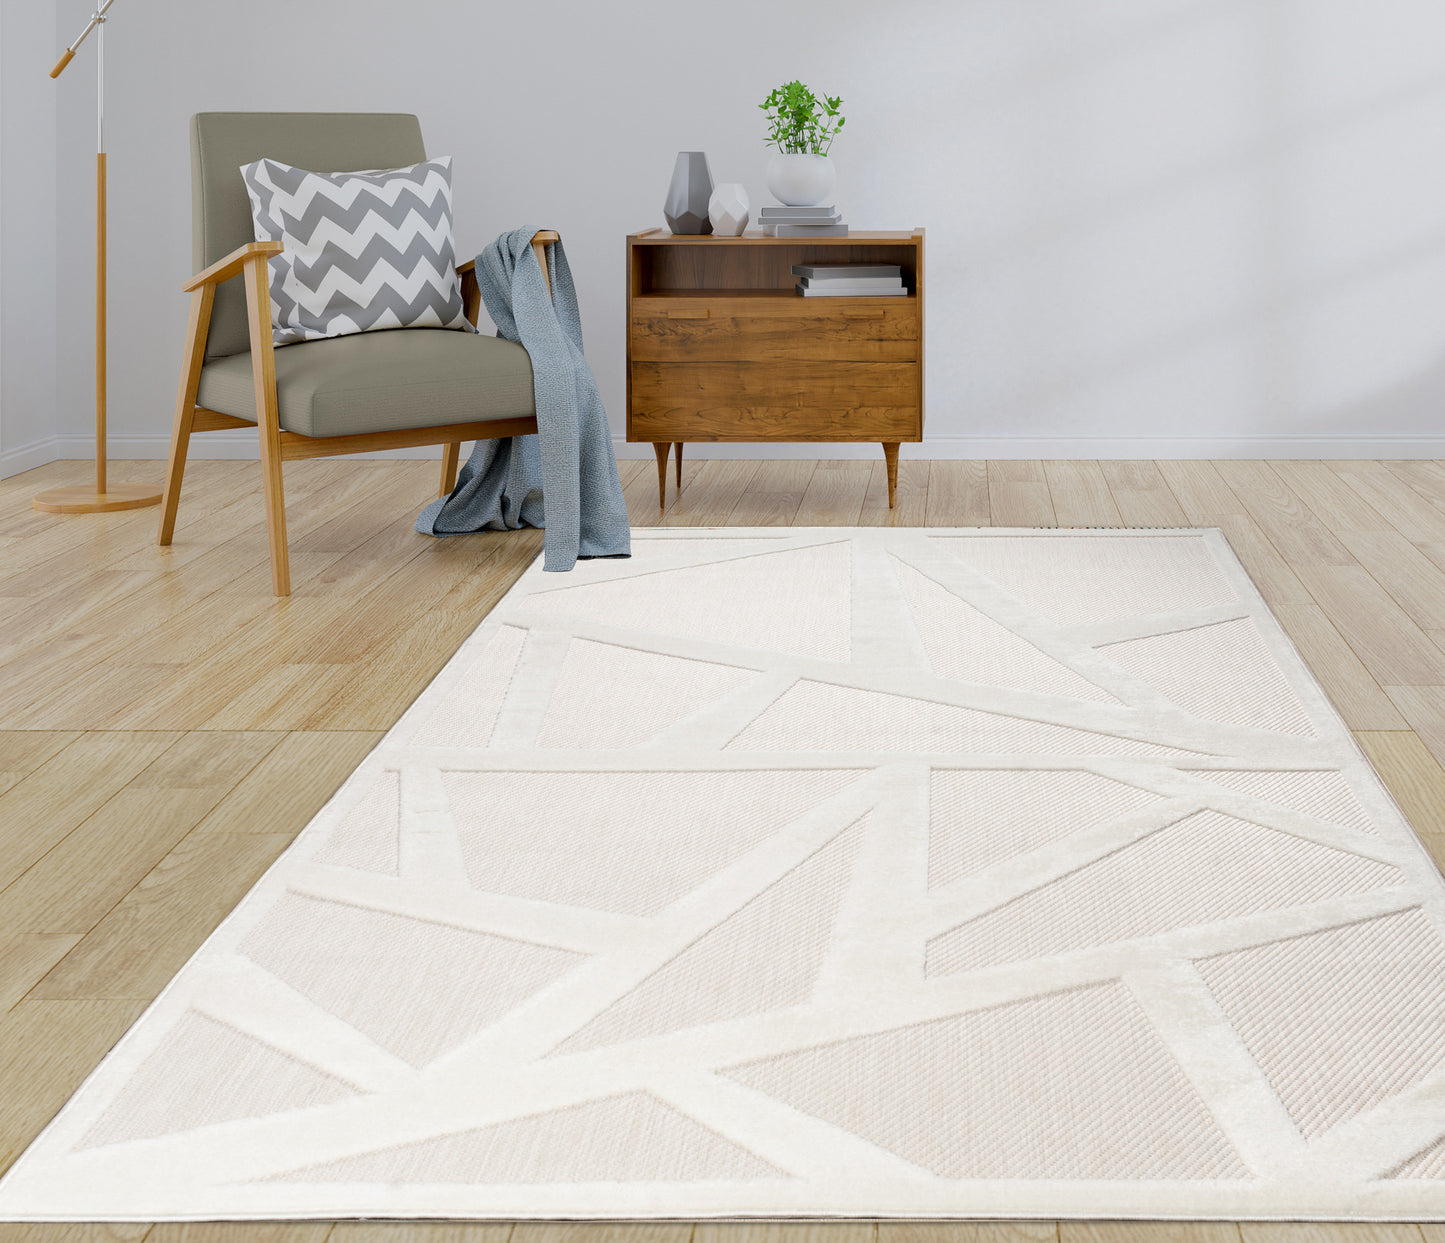 LaDole Rugs Geometric Modern Minimalist Contemporary Area Rug - Soft Carpet for Living Room, Bedroom, Office, Entrance, and Hallway - Cream and Beige